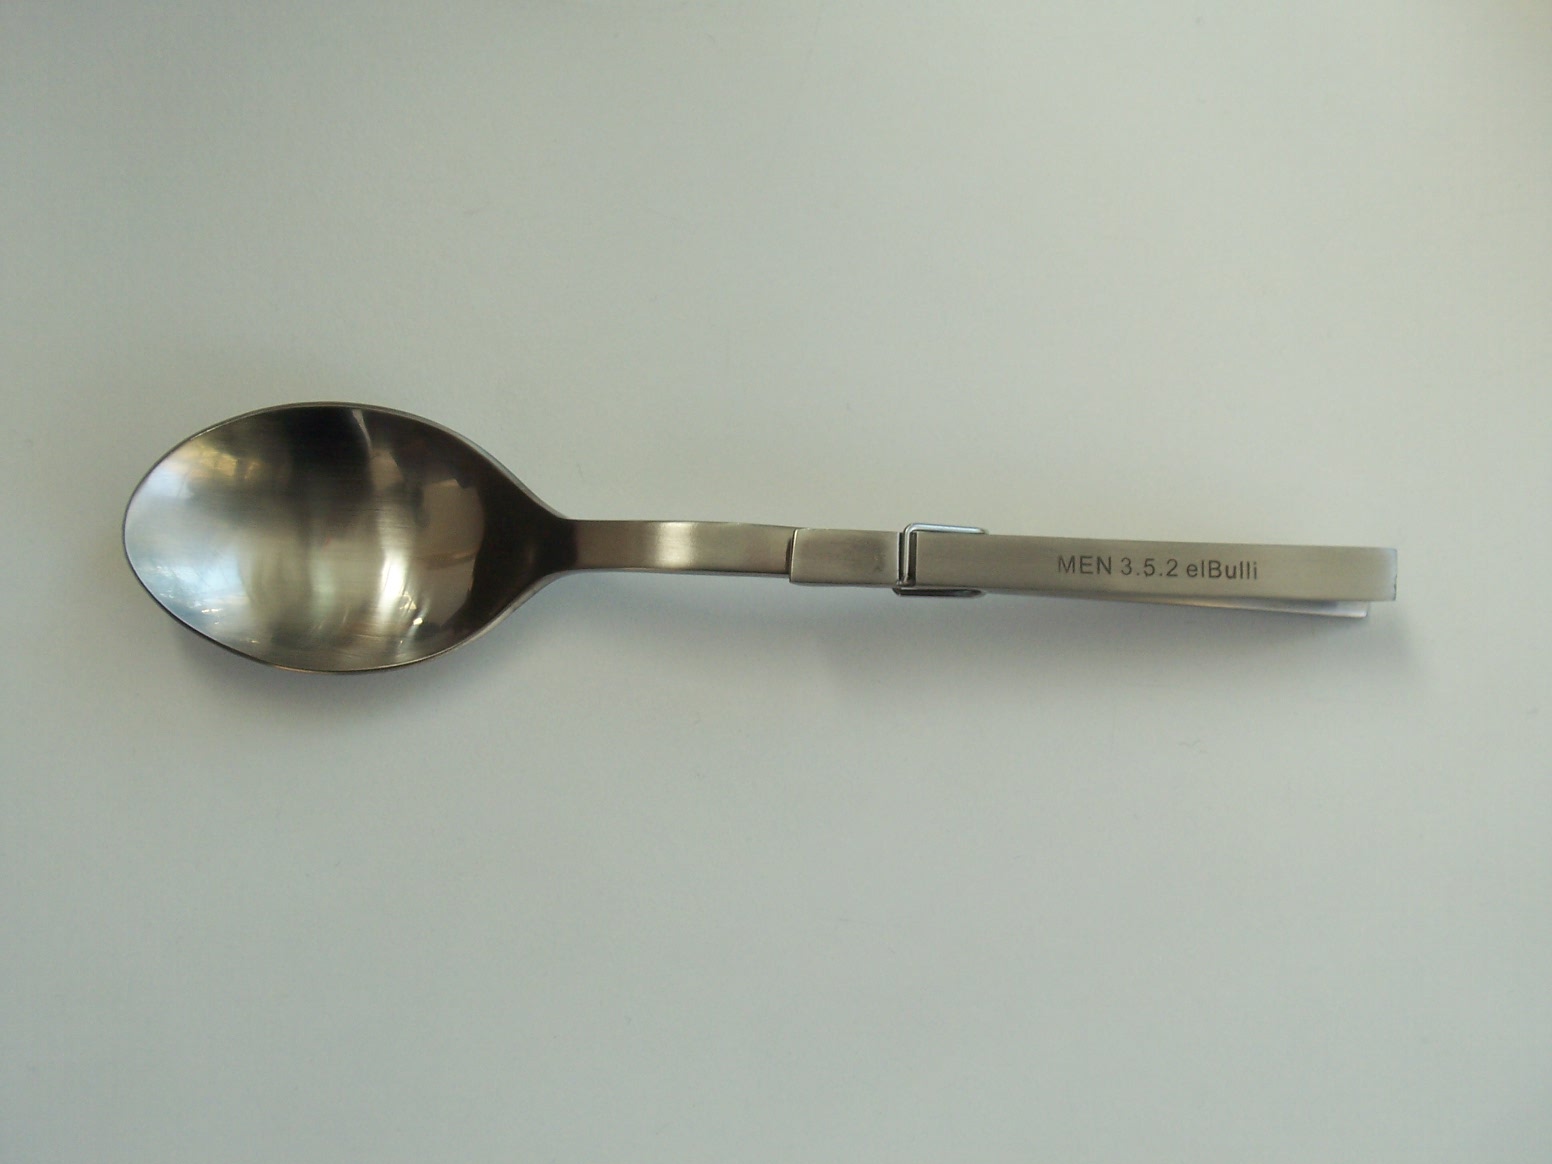 a spoon with a stainless steel spoon handle on it